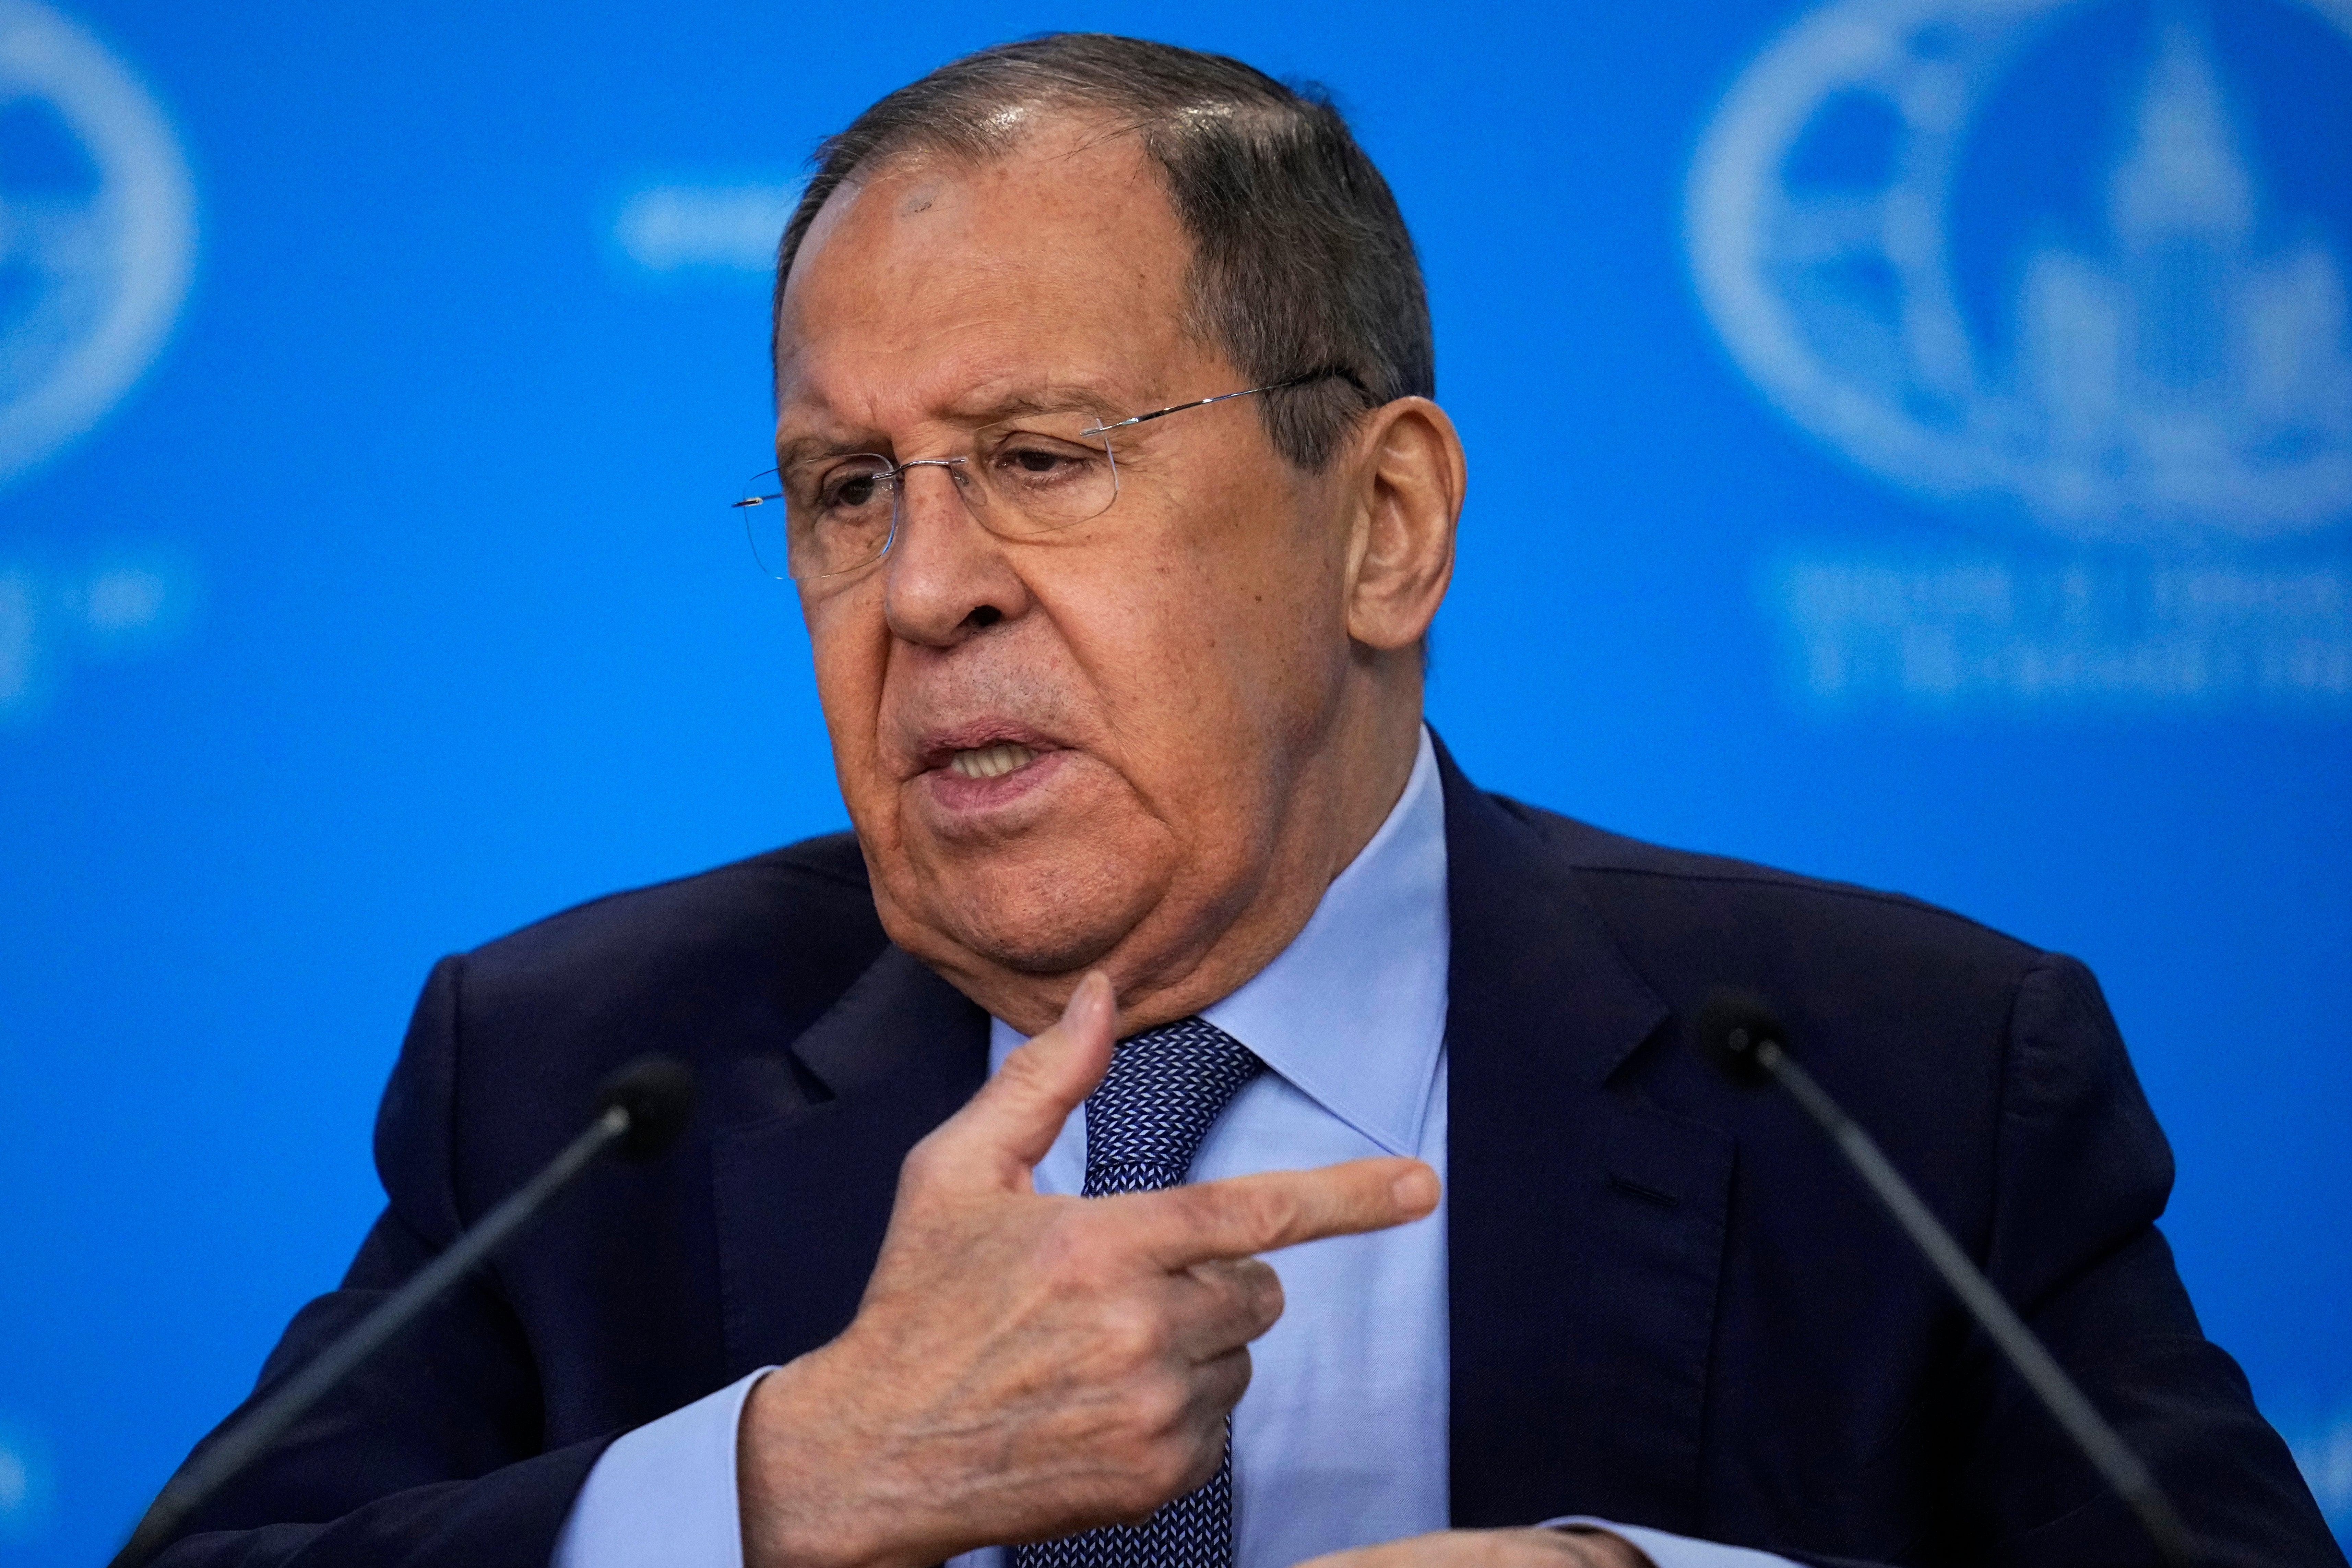 Foreign minister Sergei Lavrov told a press conference in Moscow that the war in Ukraine was having a positive impact on life in Russia